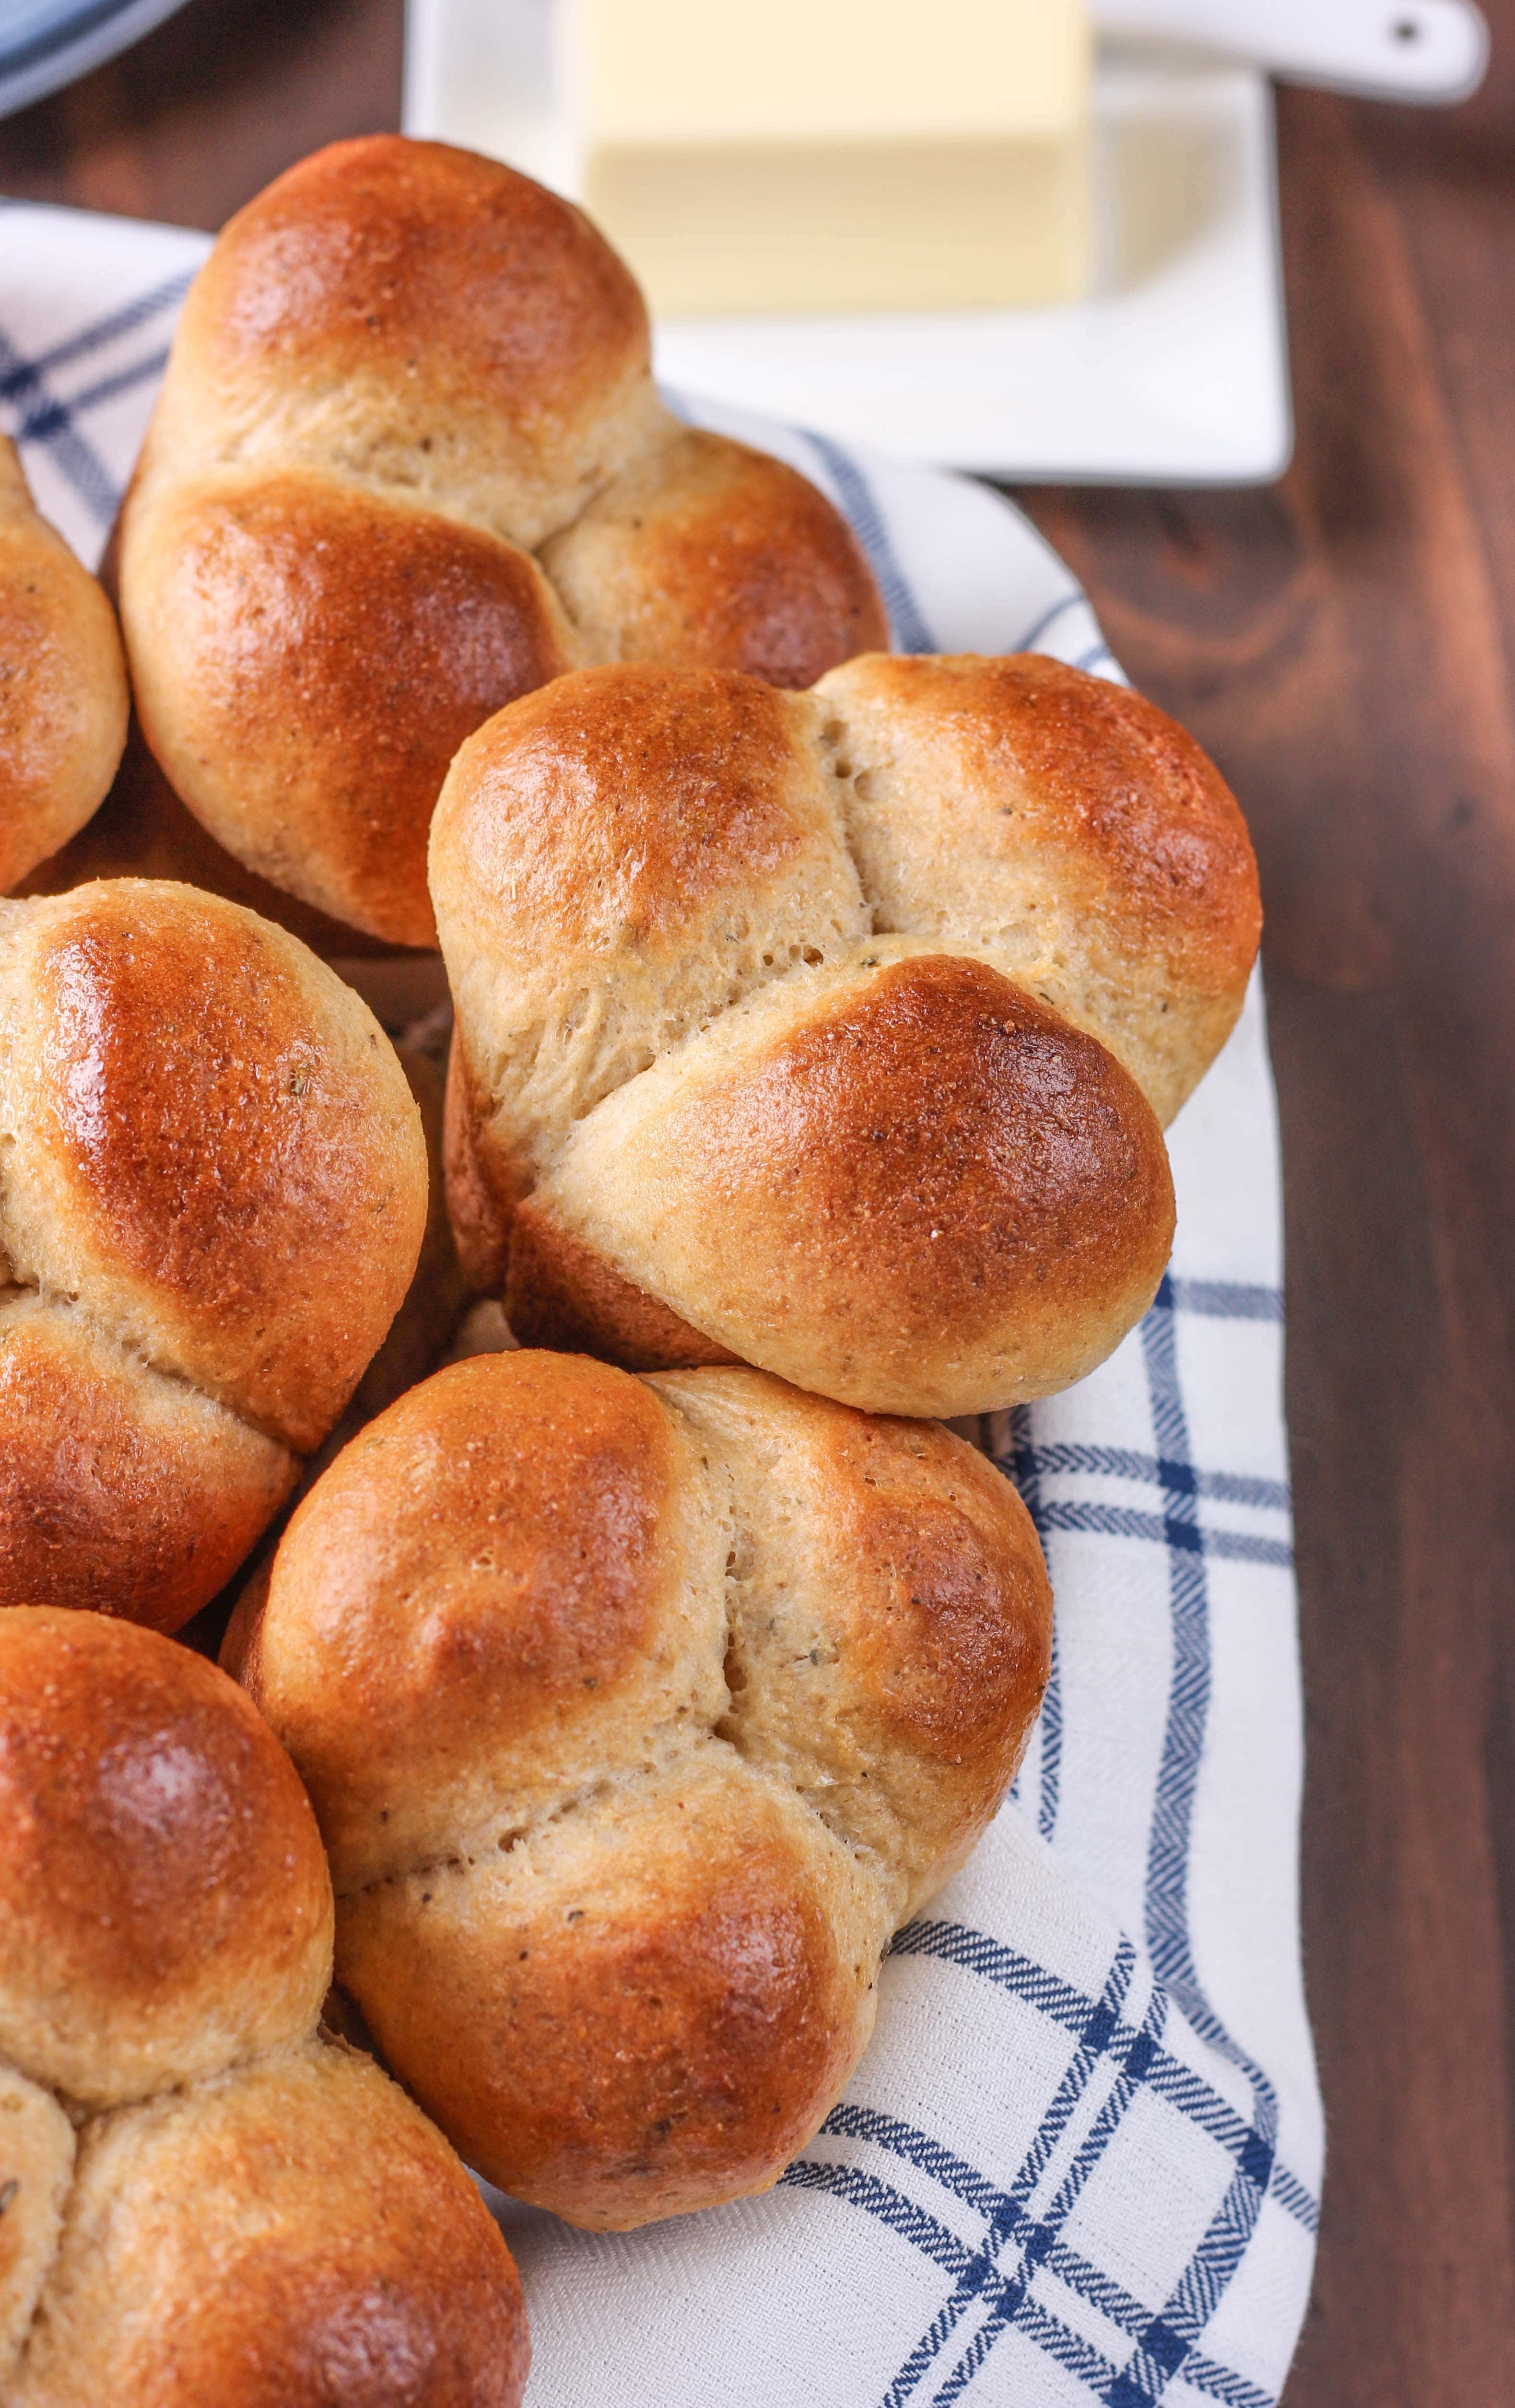 45 Minute Herbed Wheat Cloverleaf Rolls Recipe from A Kitchen Addiction